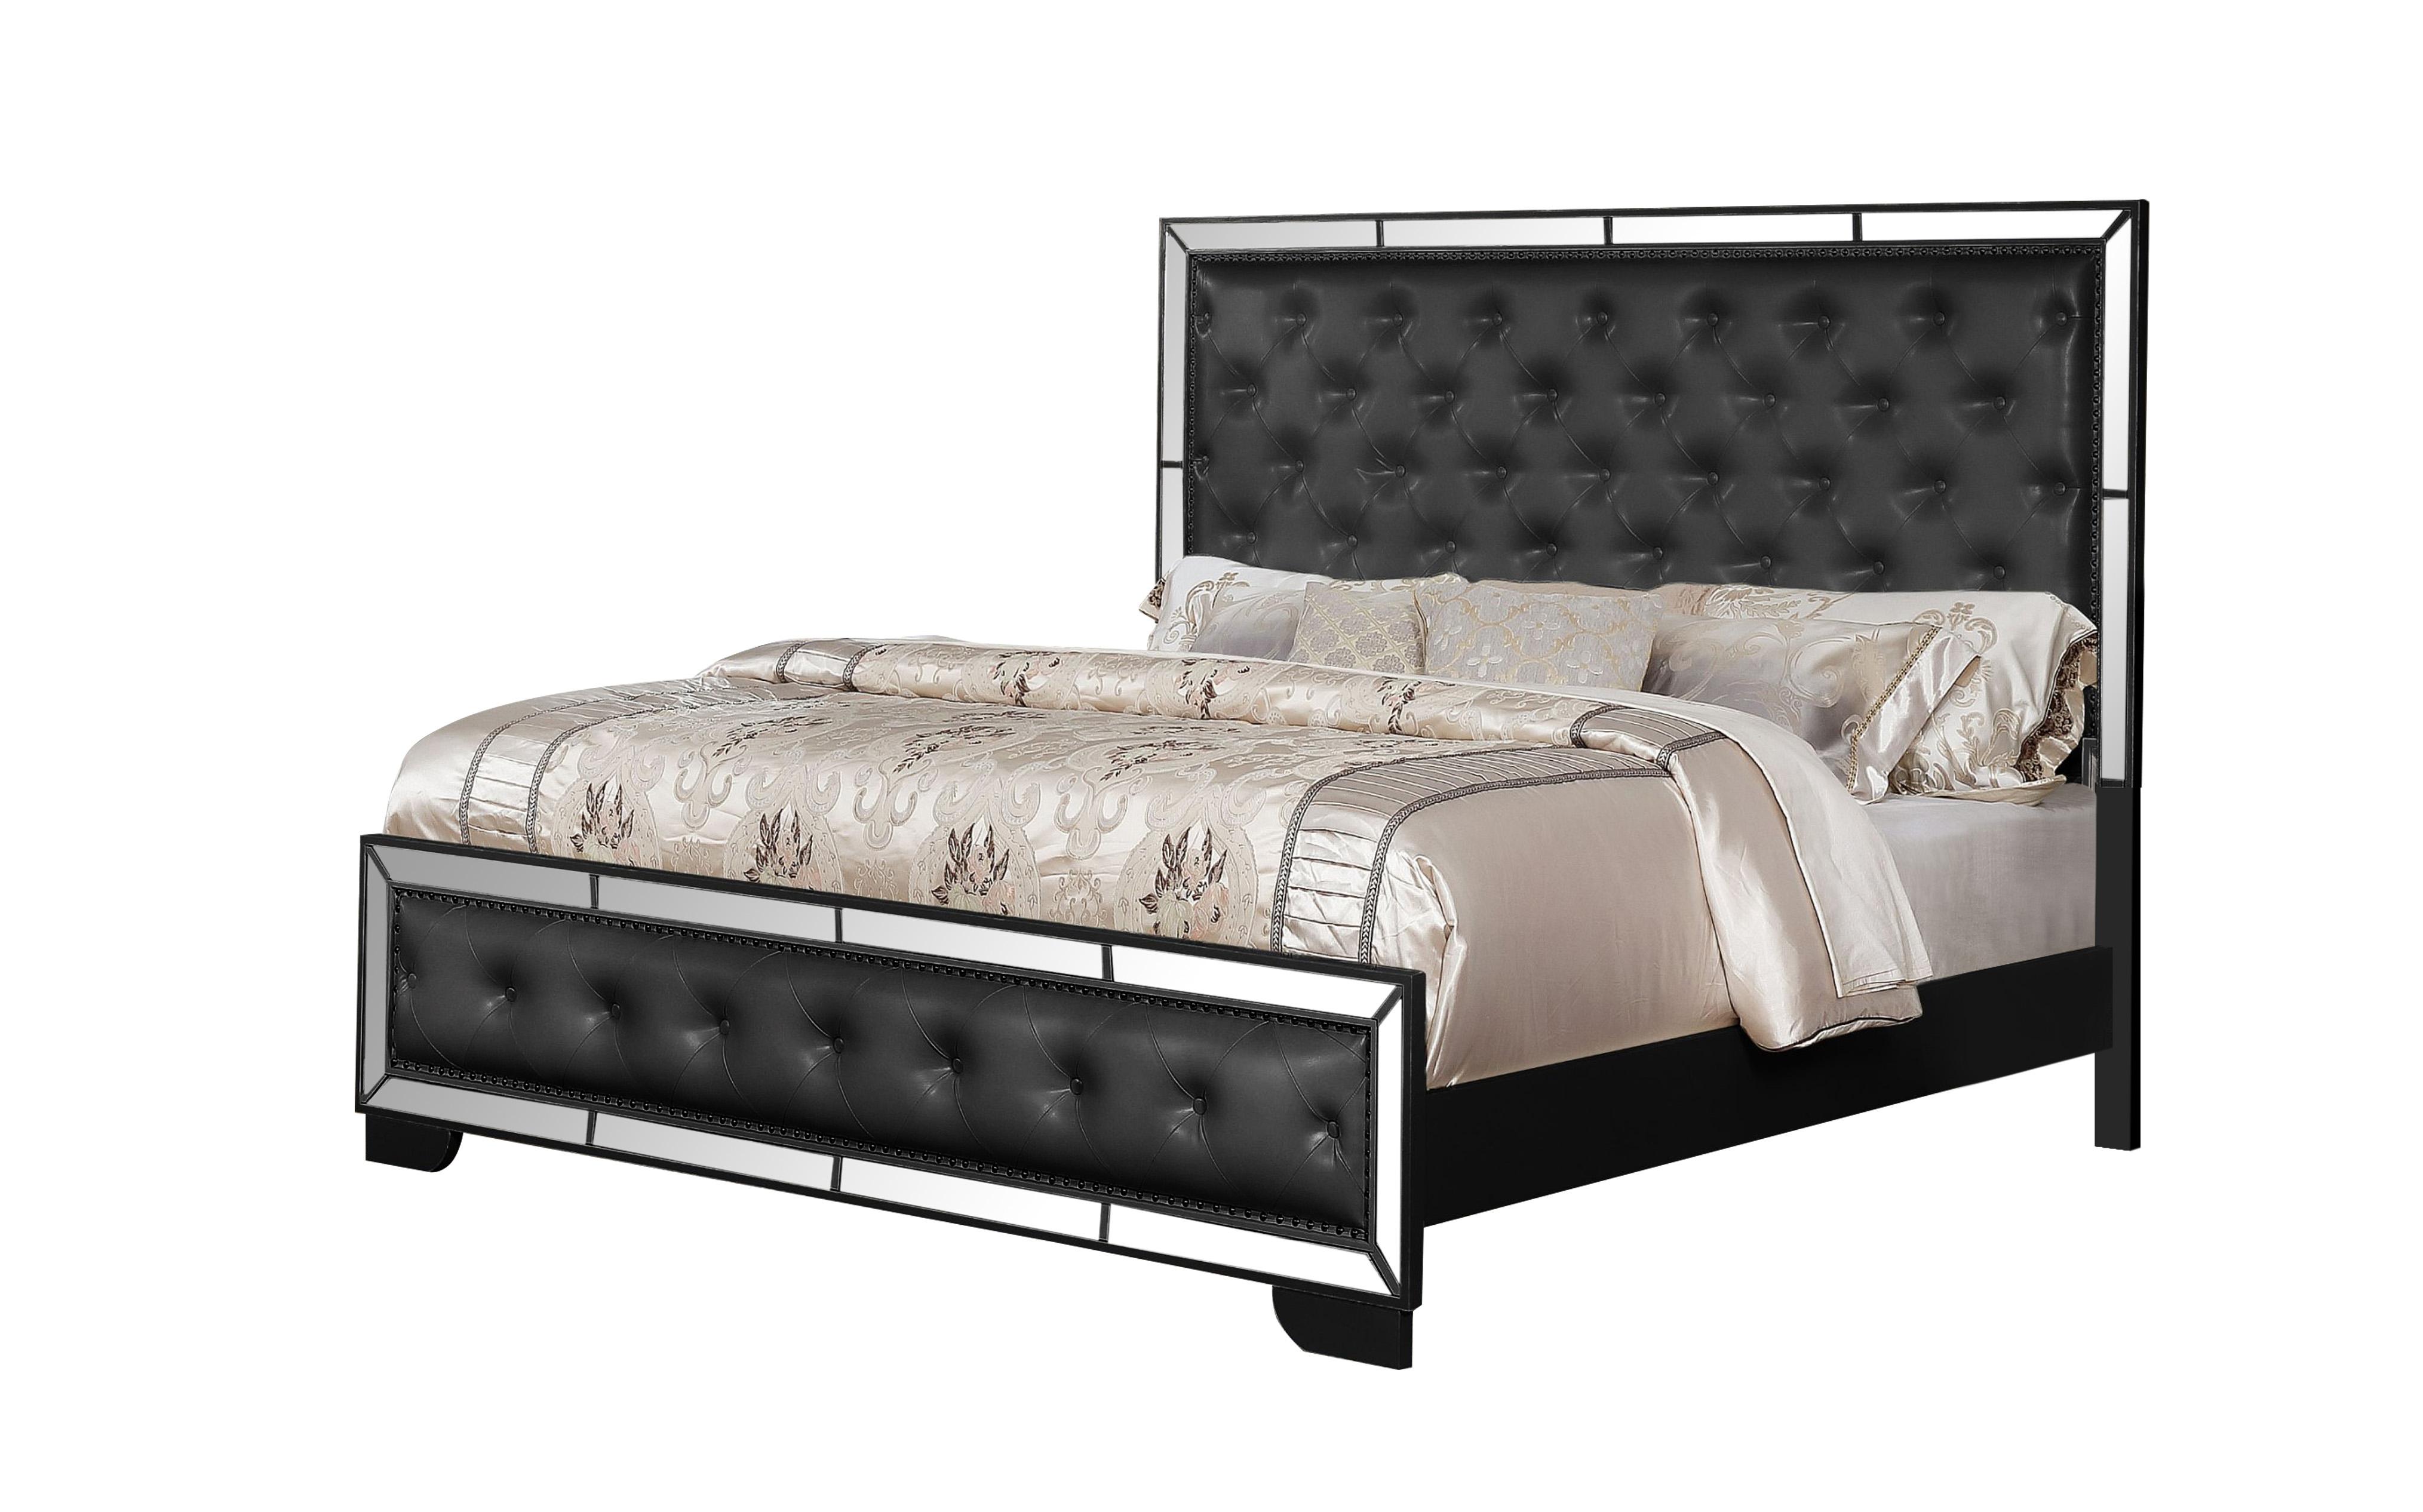 

    
Glam Black Mirrored Inlay Tufted Queen Bedroom Set 4P MADISON Galaxy Home Modern
